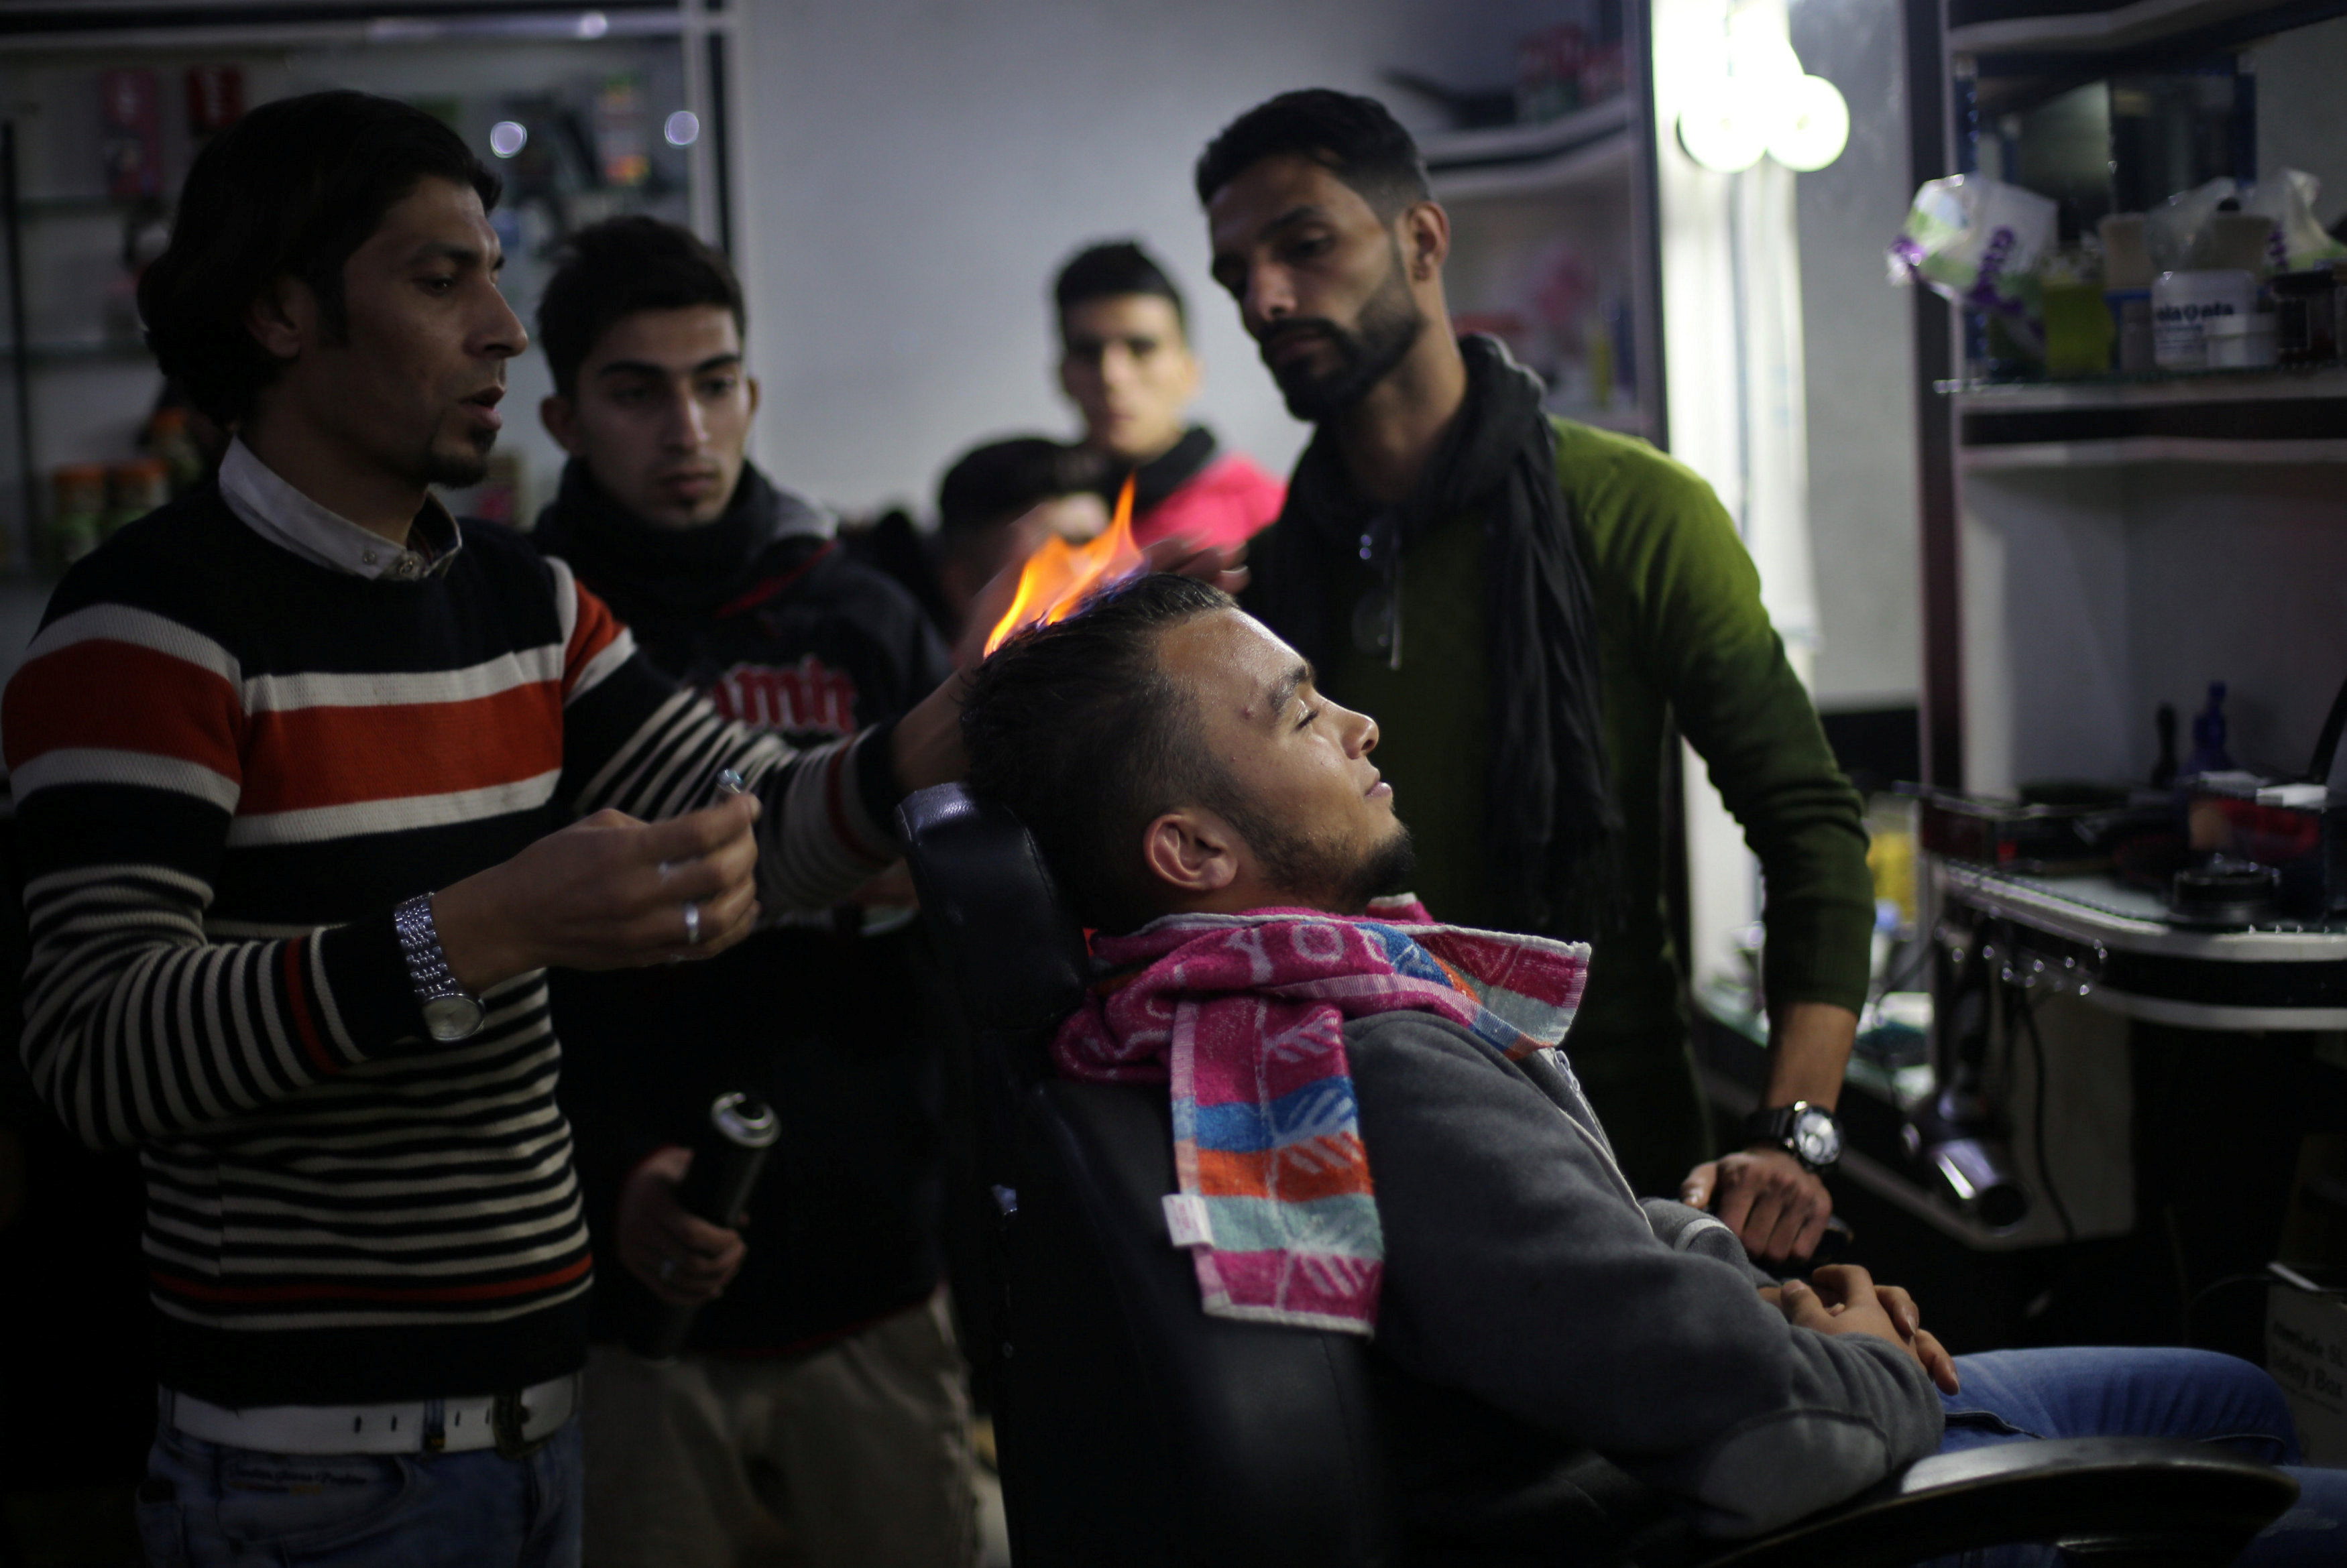 Ramadan Edwan, a Palestinian barber, uses fire in a hair-straightening technique with a client at his salon in the Rafah refugee camp, in the southern Gaza Strip. PHOTO: REUTERS